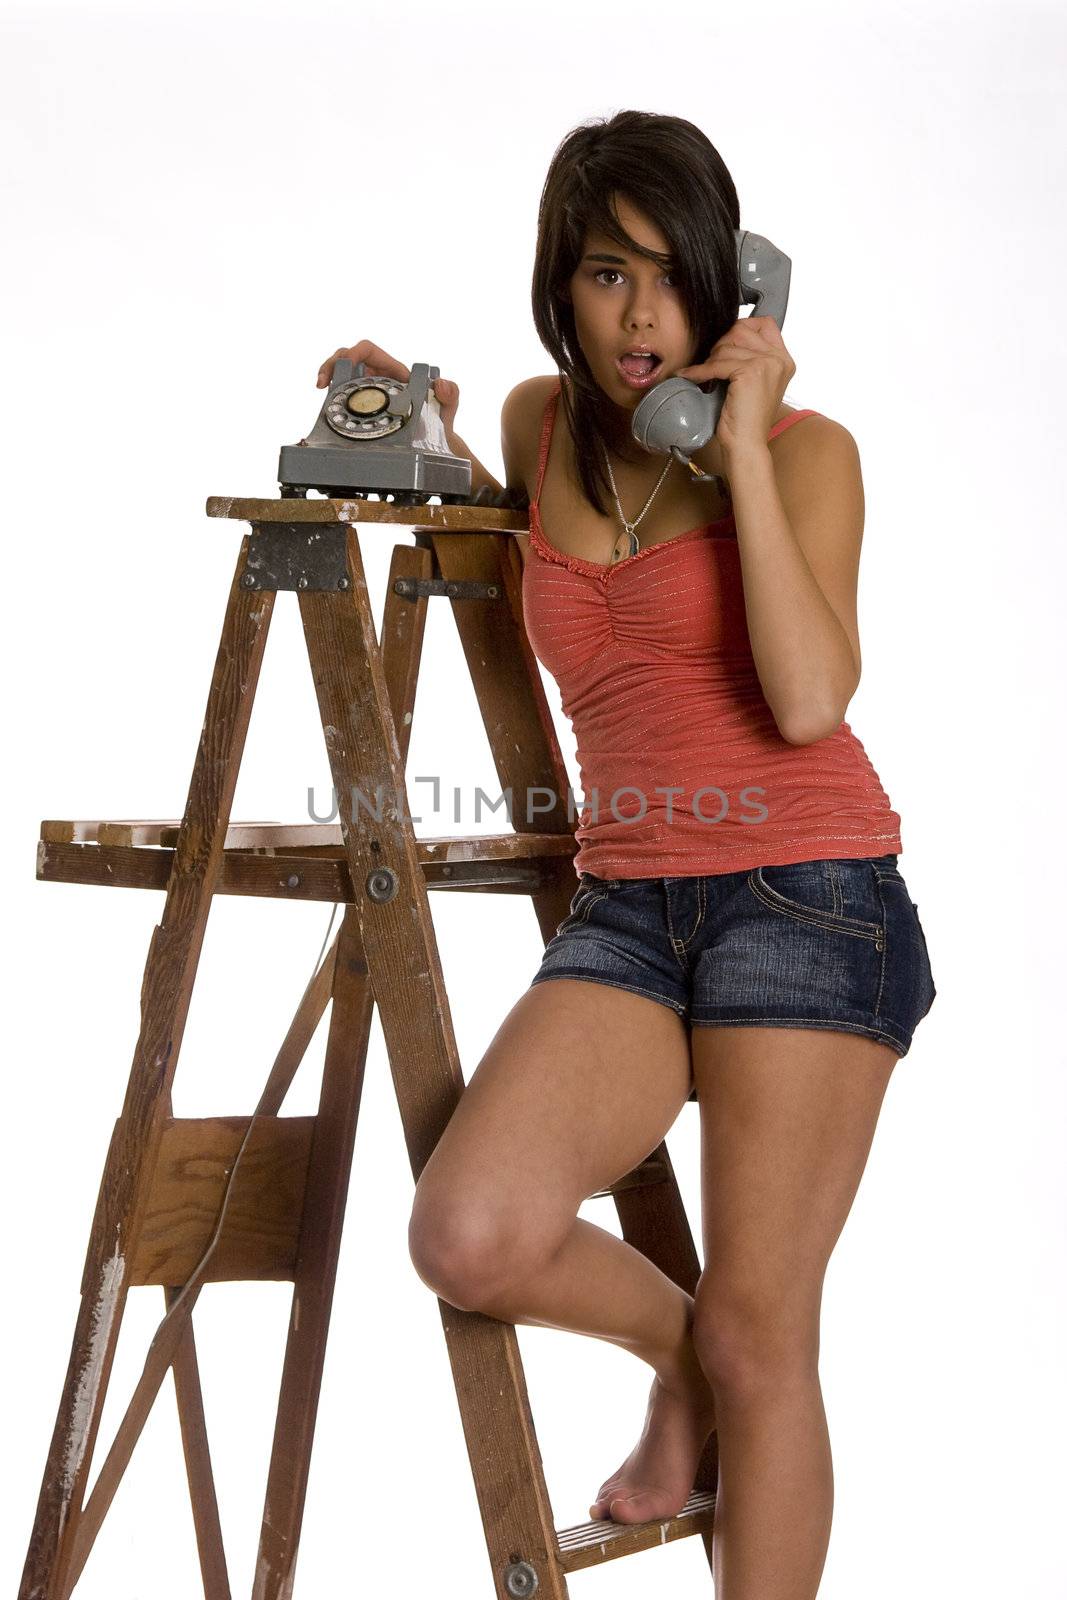 teenage girl standing barefoot on ladder talking on a old rotary phone with a surprise expression